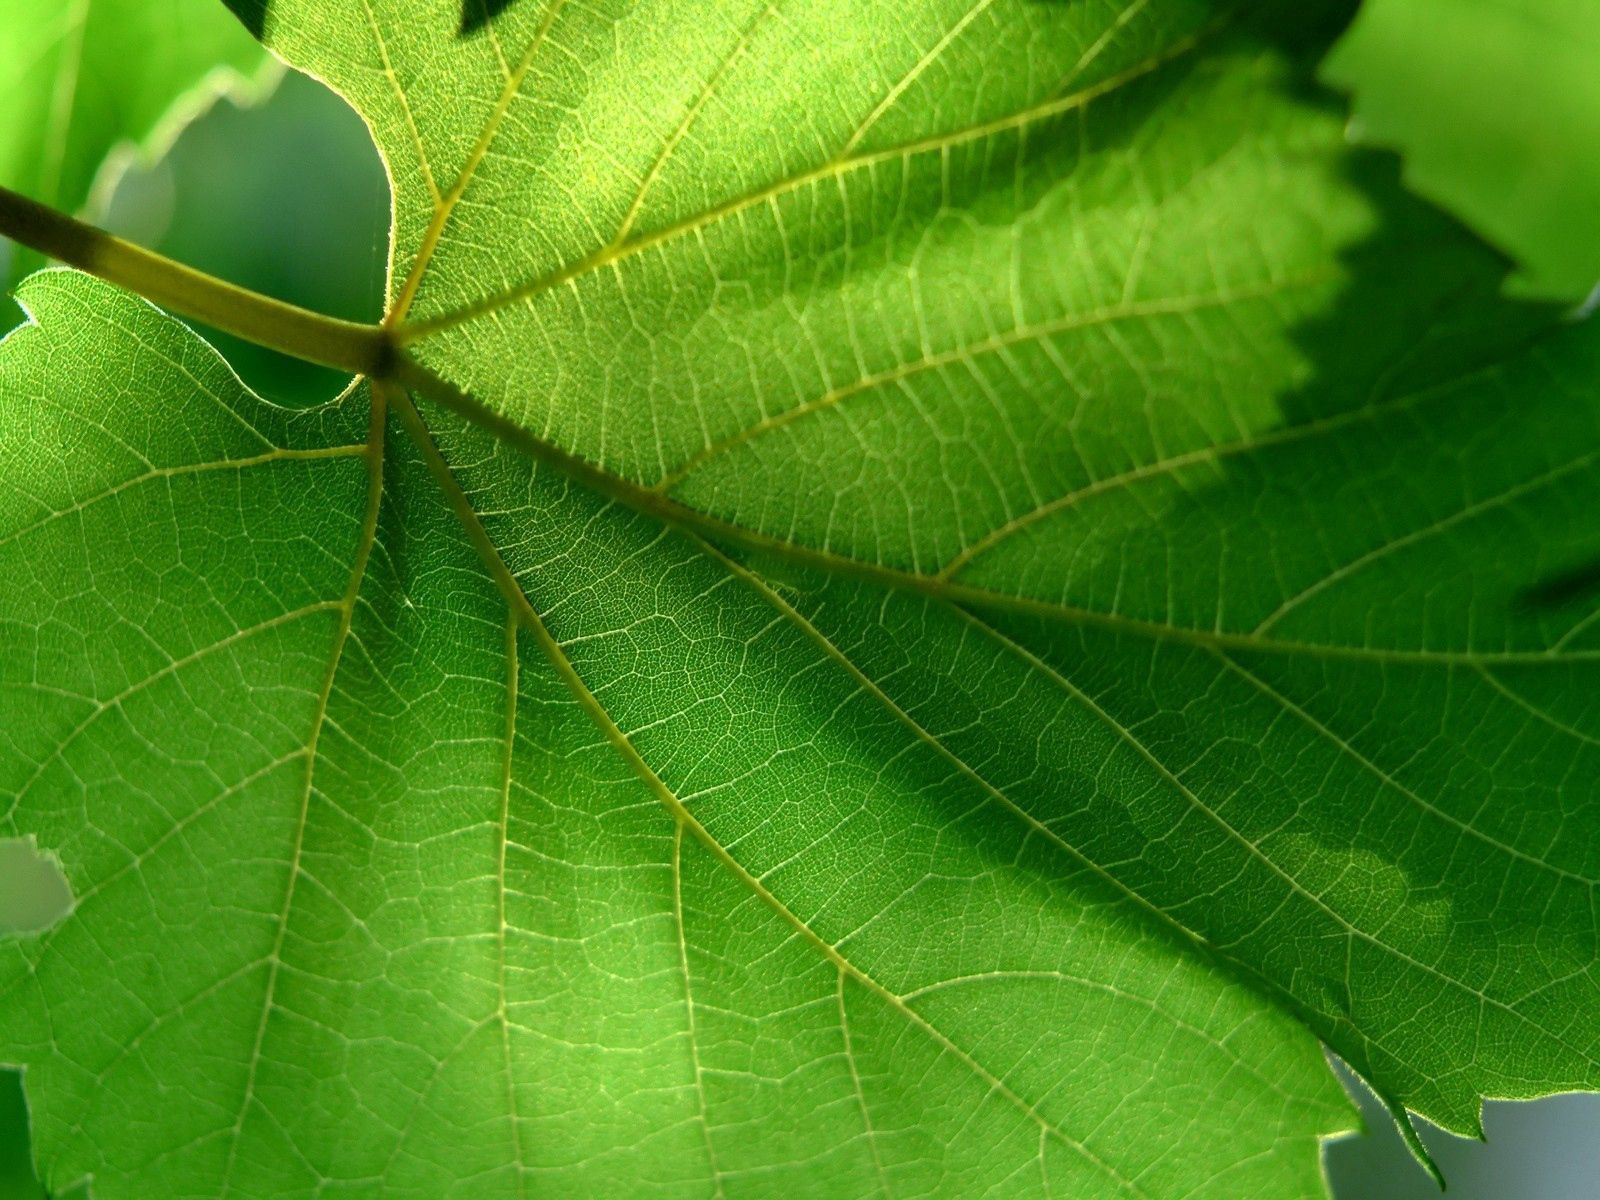 New Lock Screen Wallpapers summer, green, macro, sheet, leaf, carved, form